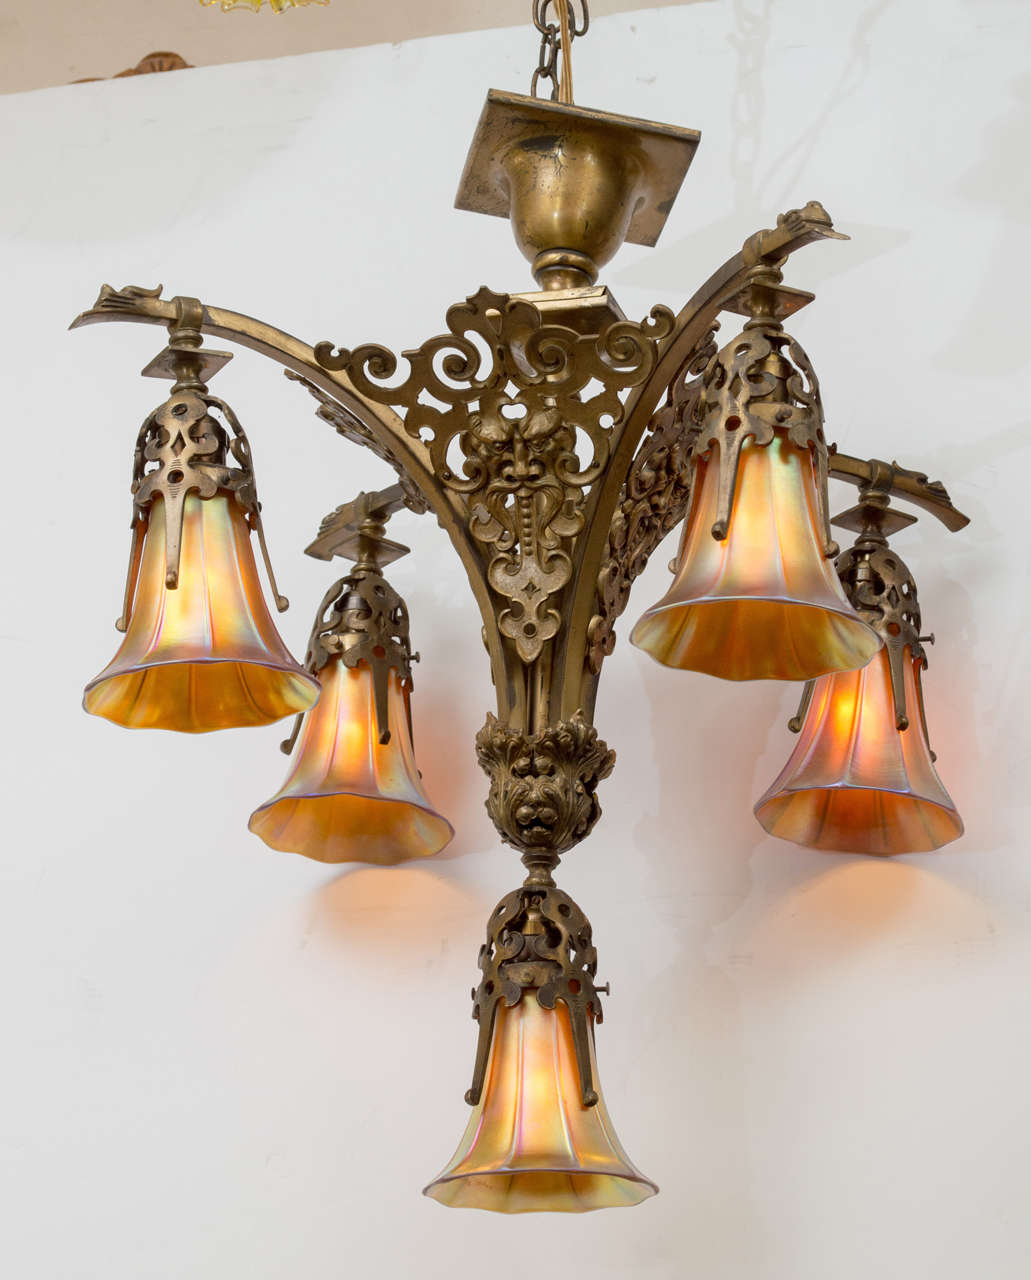 This very eye-catching chandelier is about quality. Detail castings, and original handblown art glass shades make this a wonderful package. Note the face in the center of the body as well as the little bearded faces on the top of the arms. We can